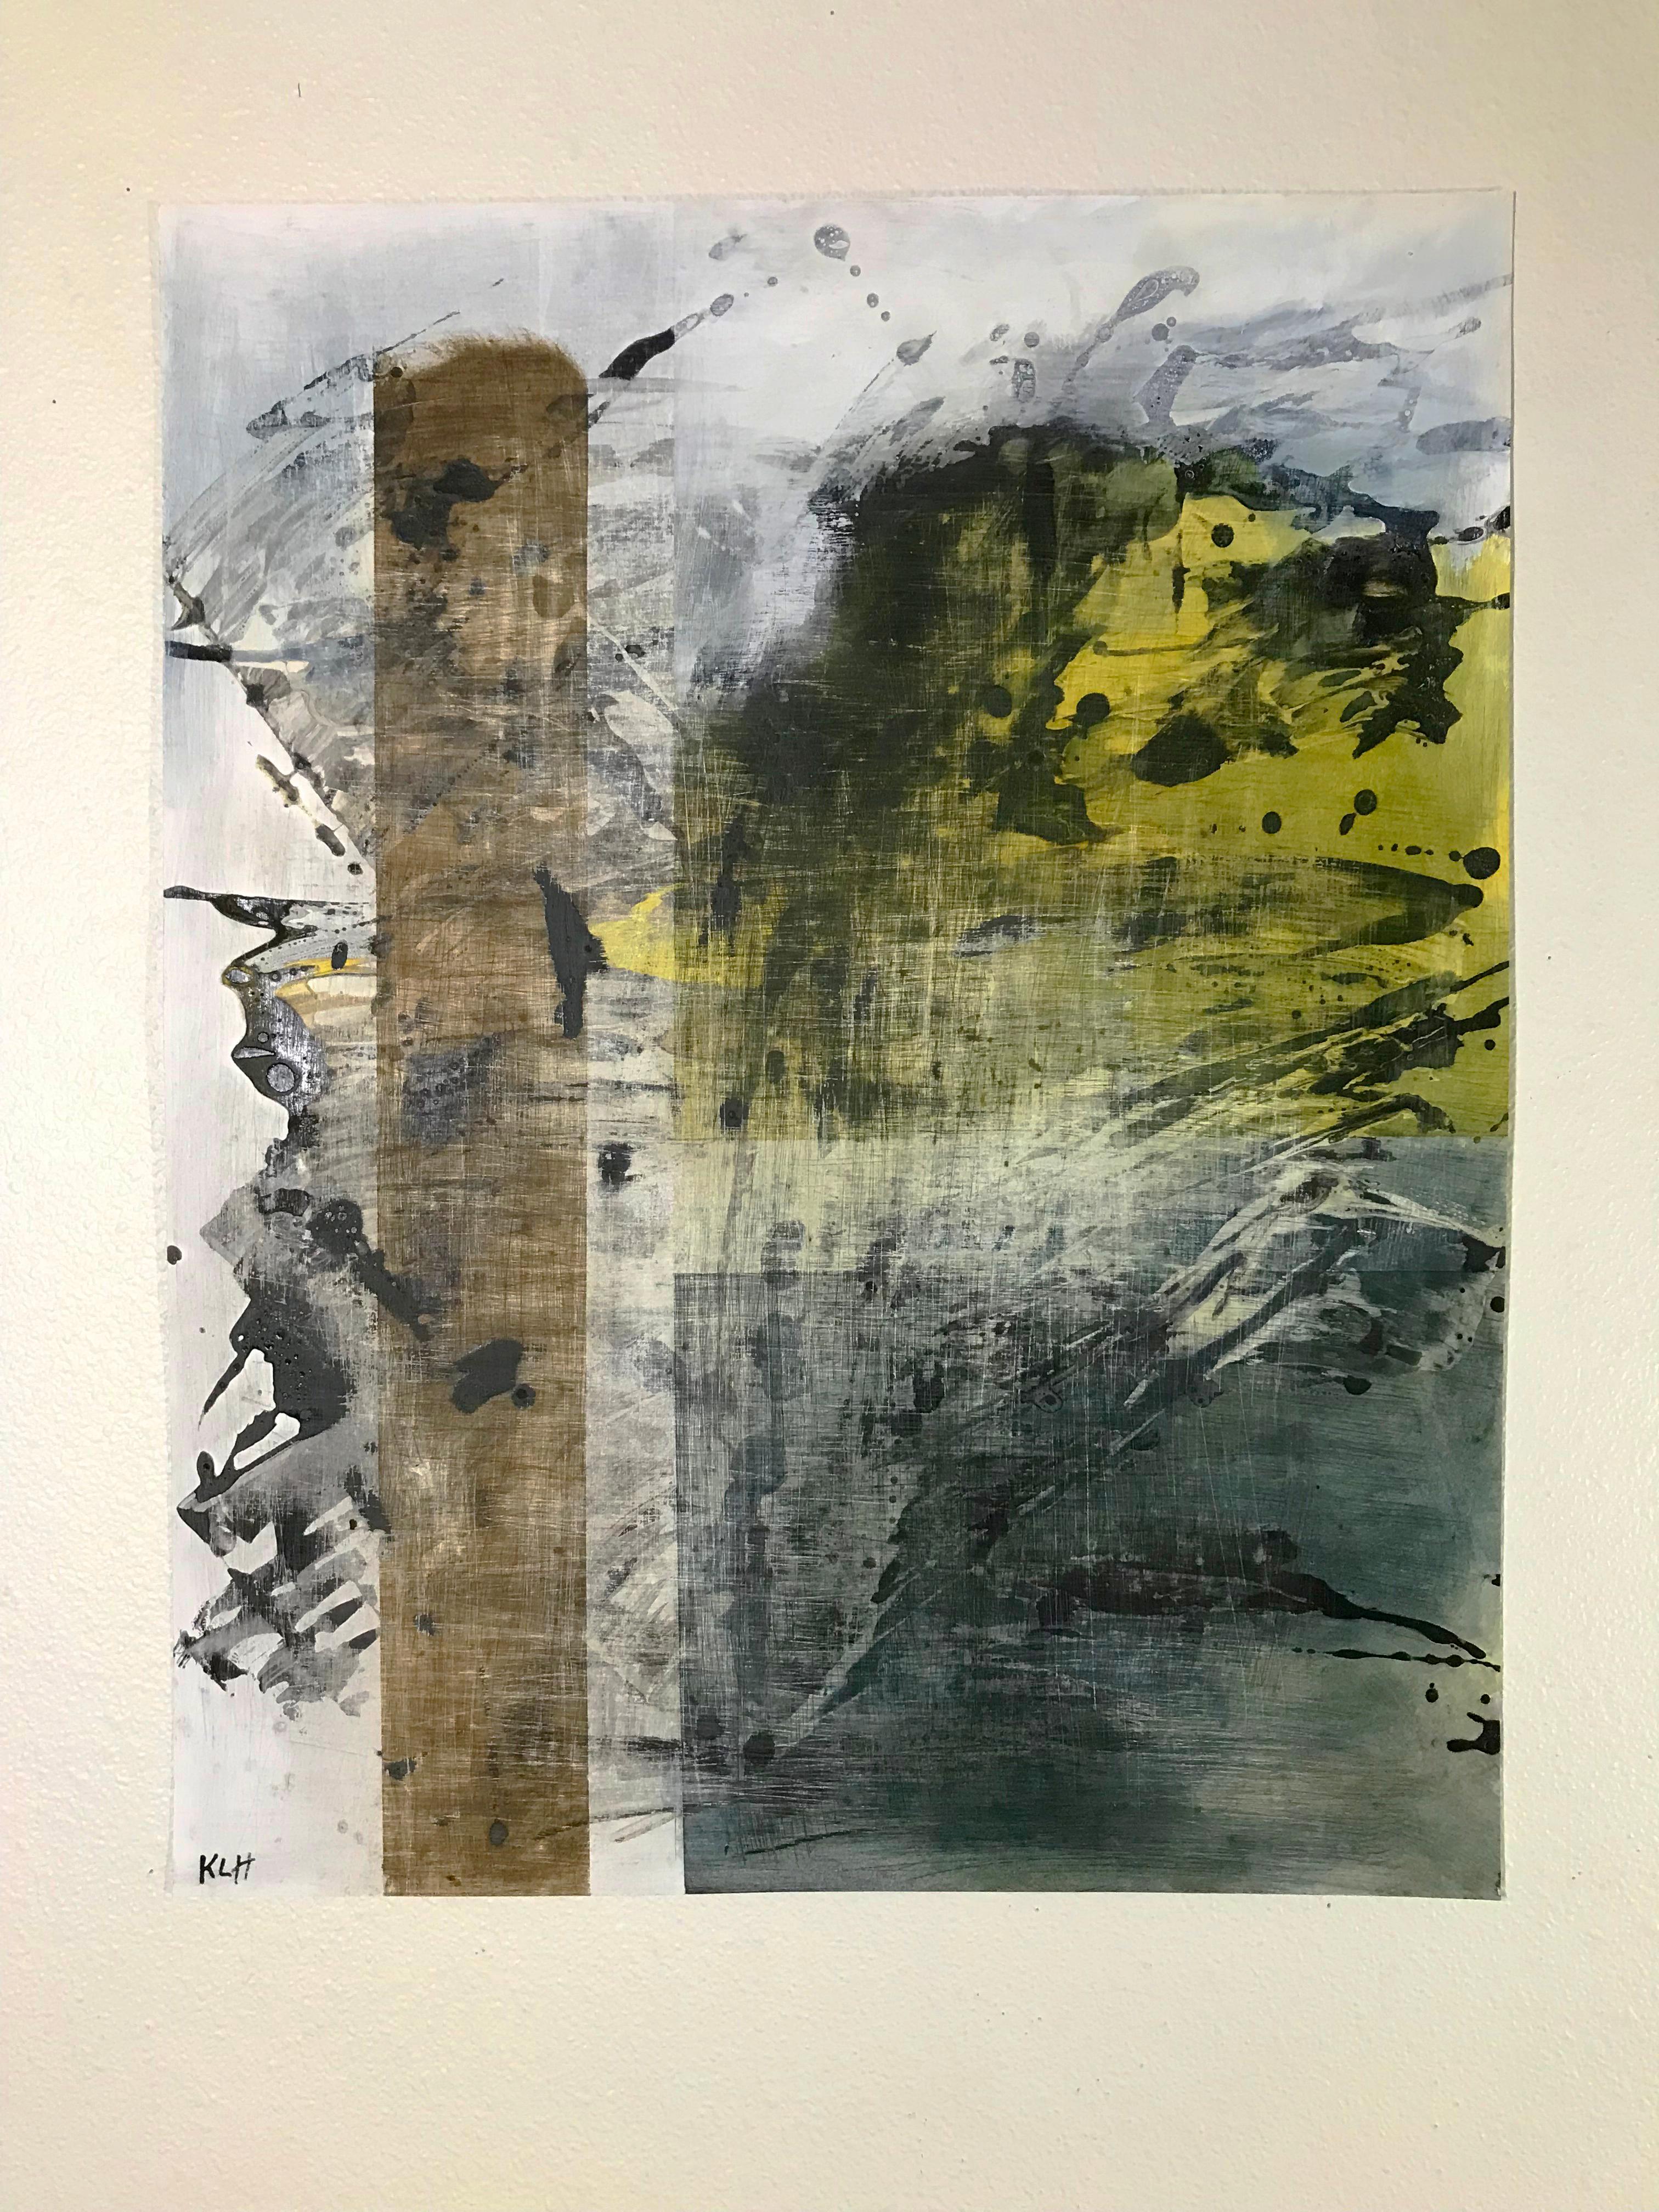 <p>Artist Comments<br>Thick splashes and spatters in black appear over bold strokes of umber, yellow, and deep green in this expressive abstract by artist Kris Haas. Scratches and marks create texture above adding to the artwork's dramatic